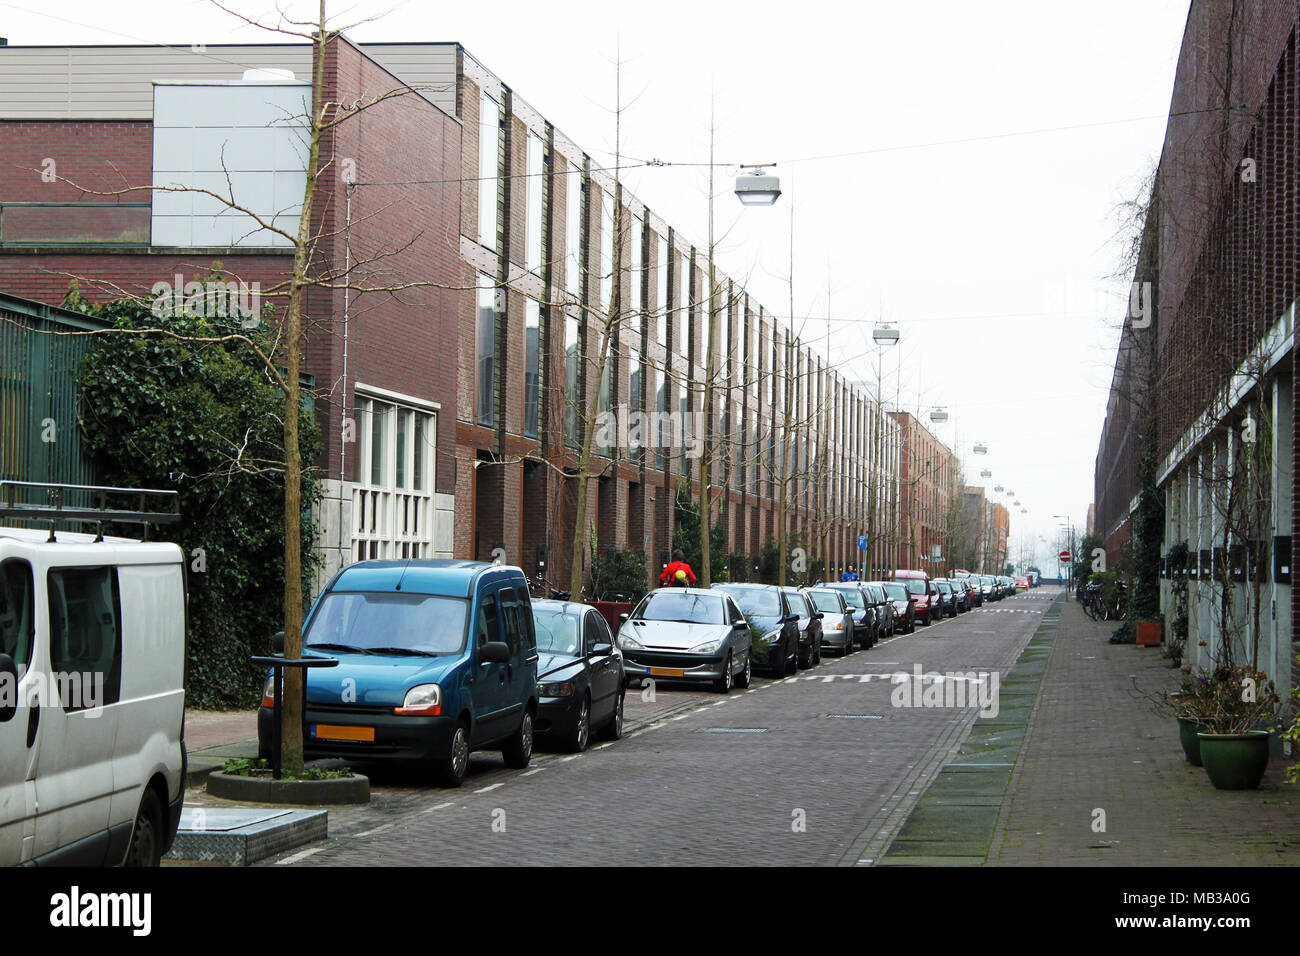 Quiet street of a small north european town. Cars are parked in the side of driveway. Stock Photo